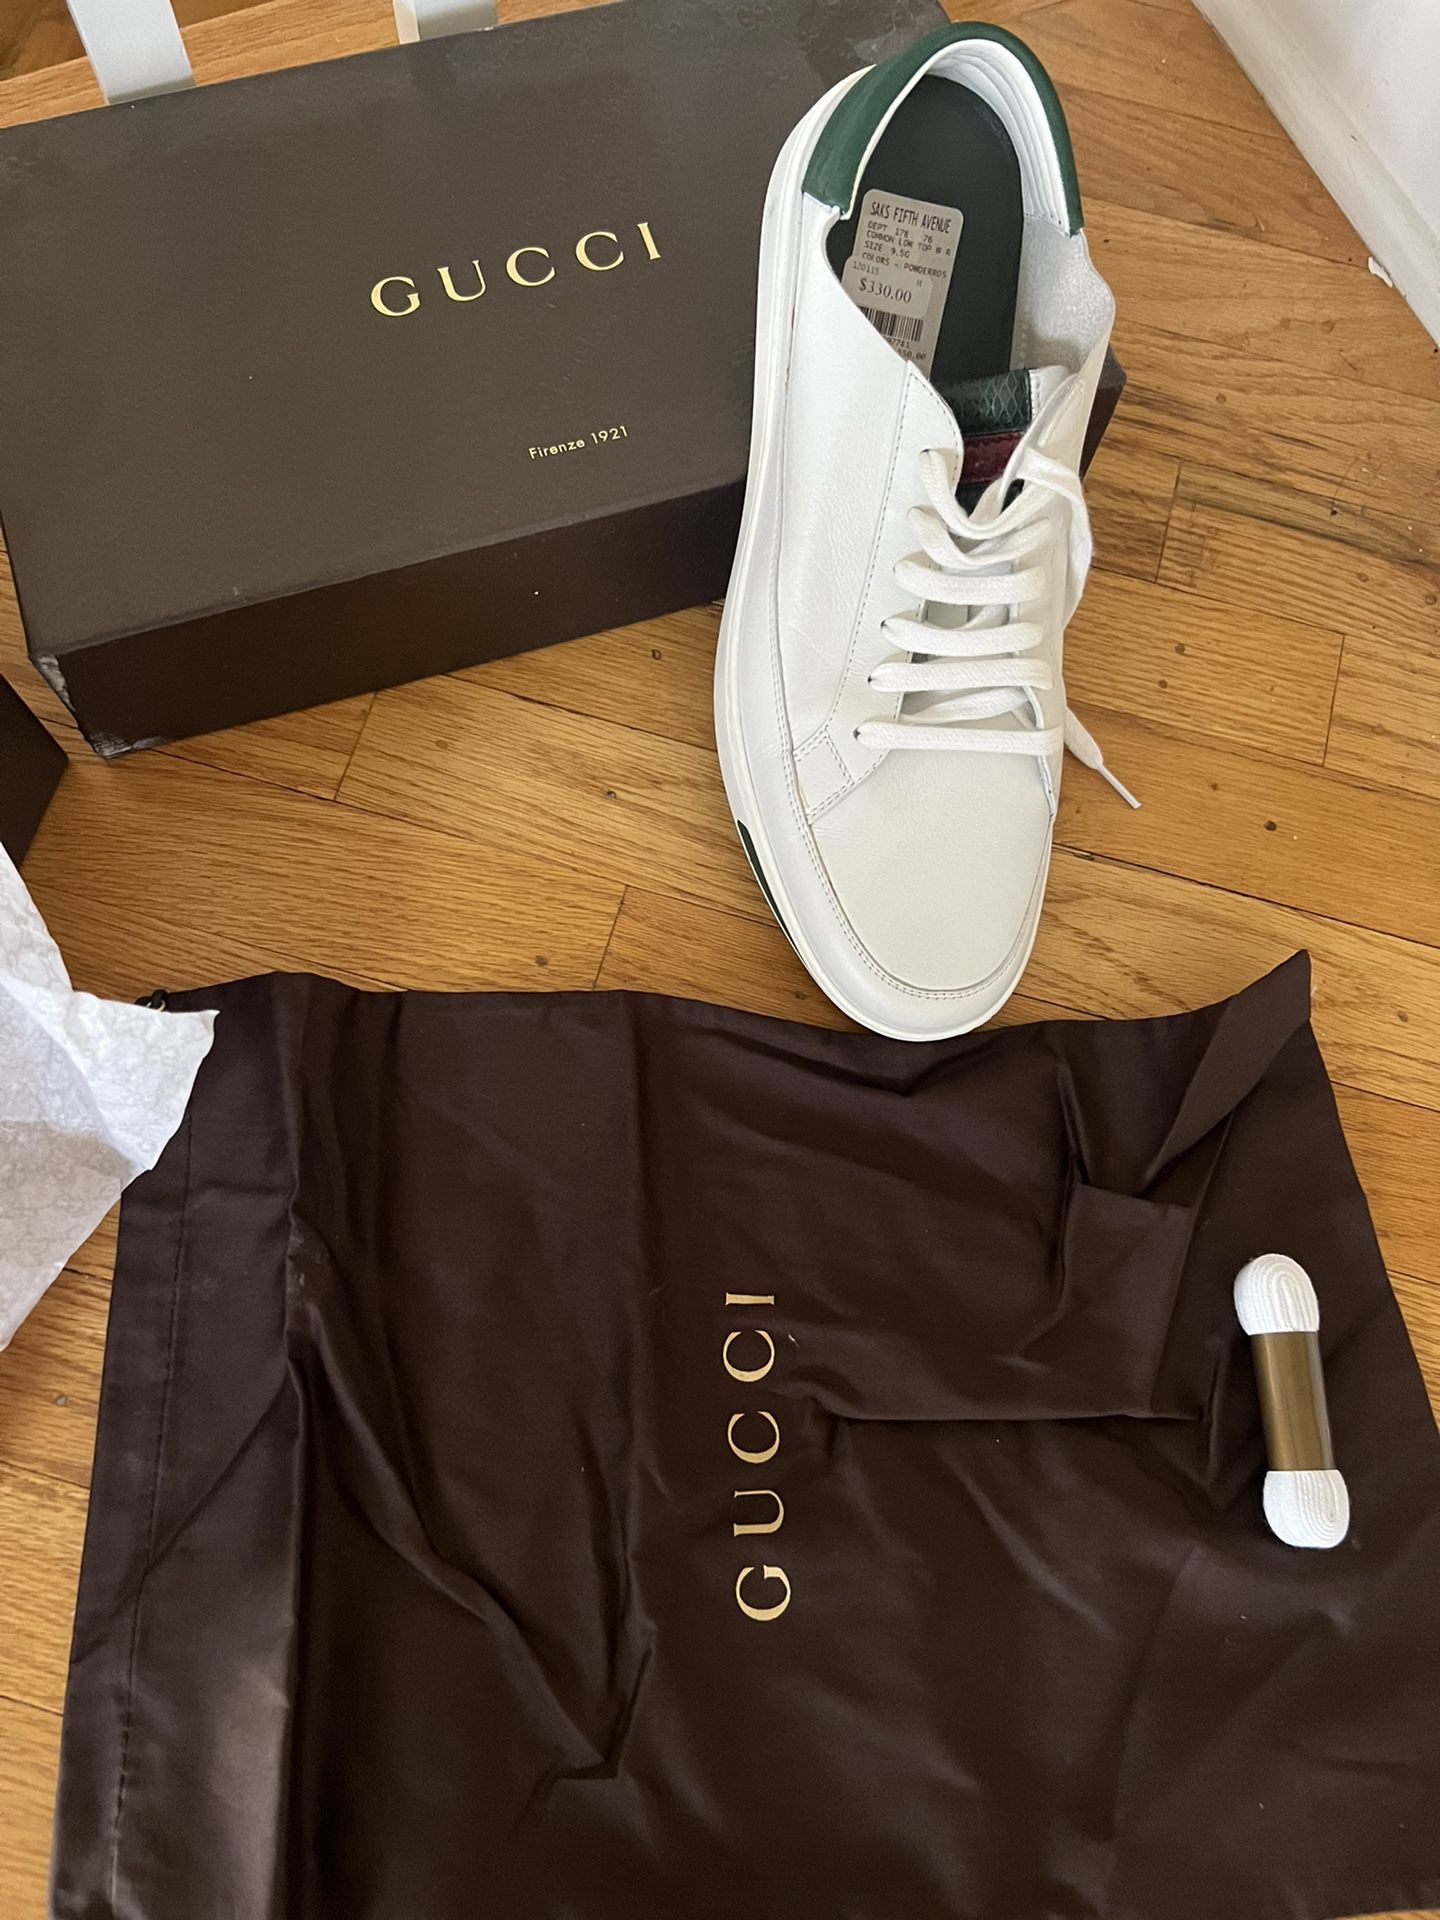 Gucci Mens Shoes White And Green for Sale in Atlanta, GA - OfferUp